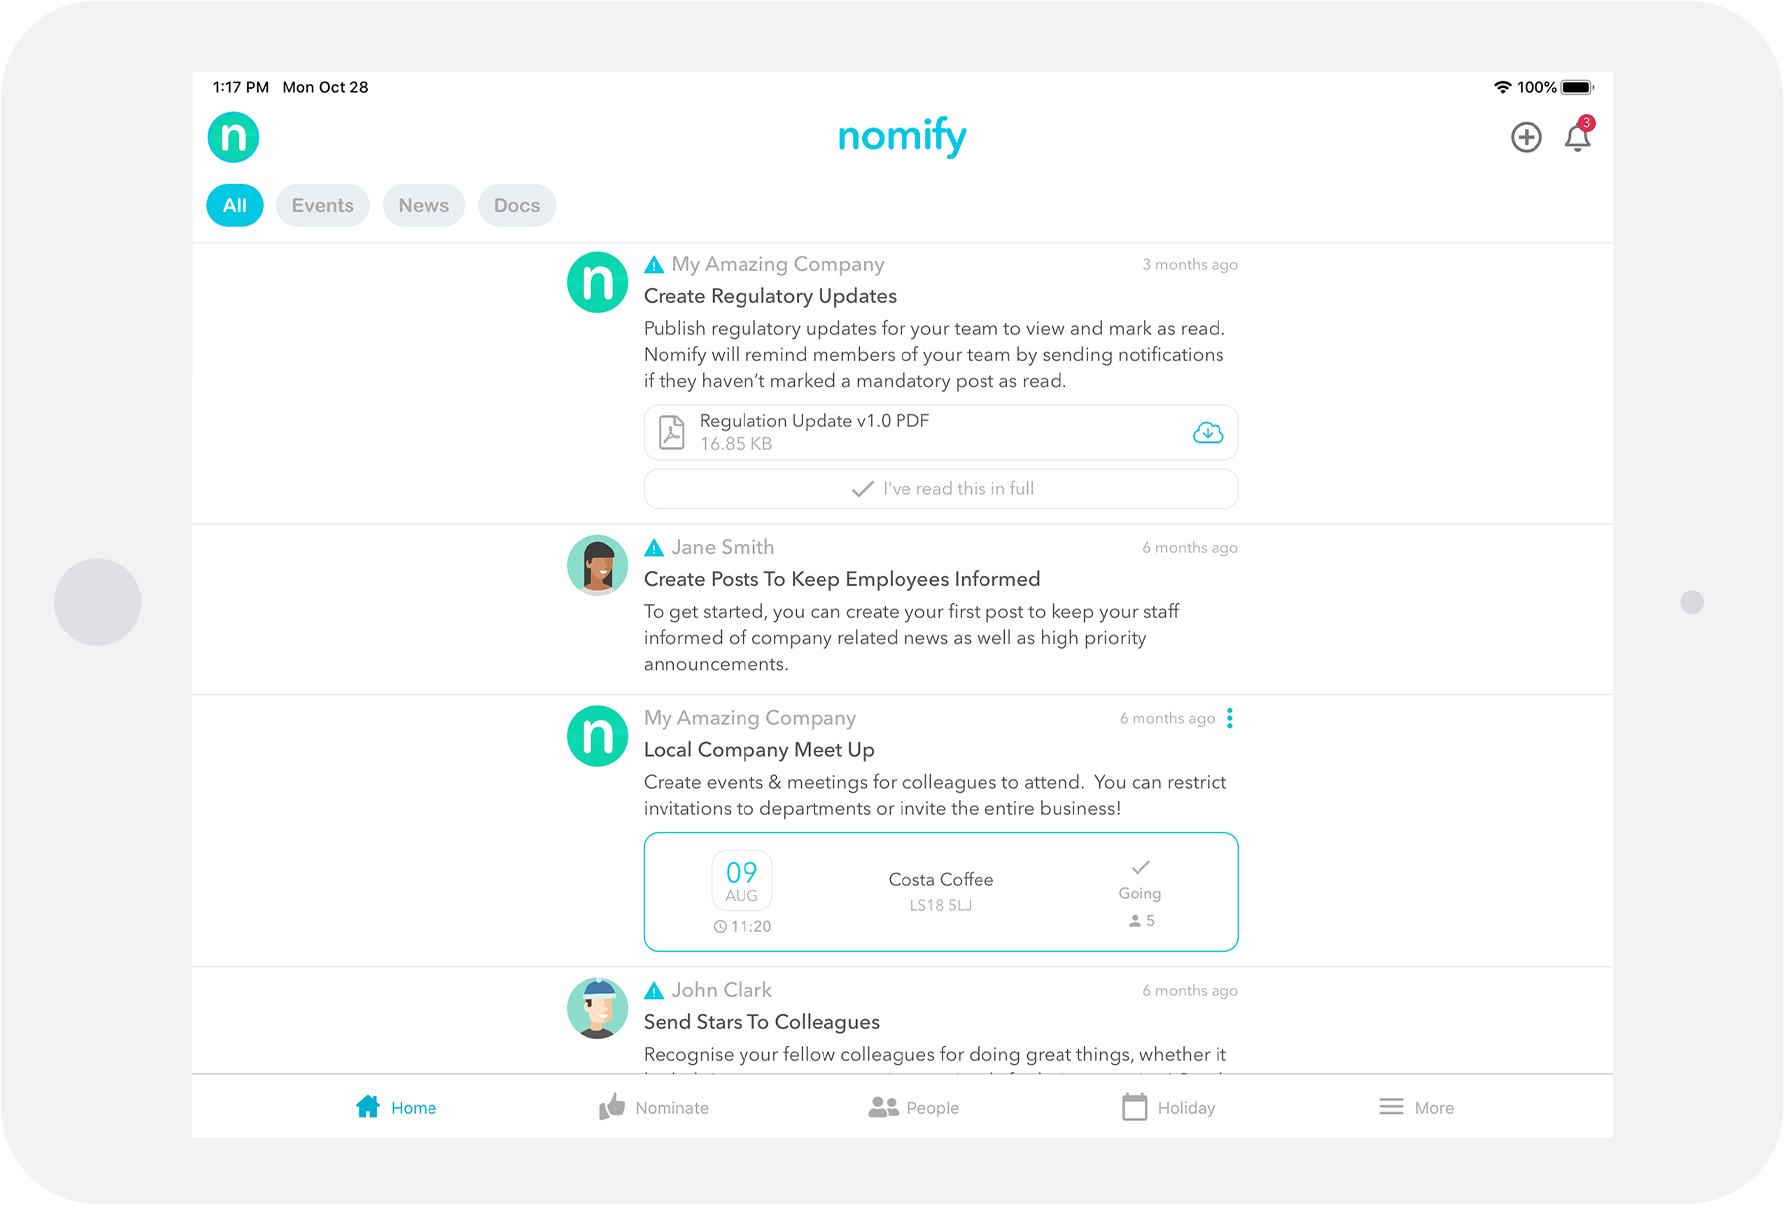 Nomify - The Employee Engagement App available on Tablets